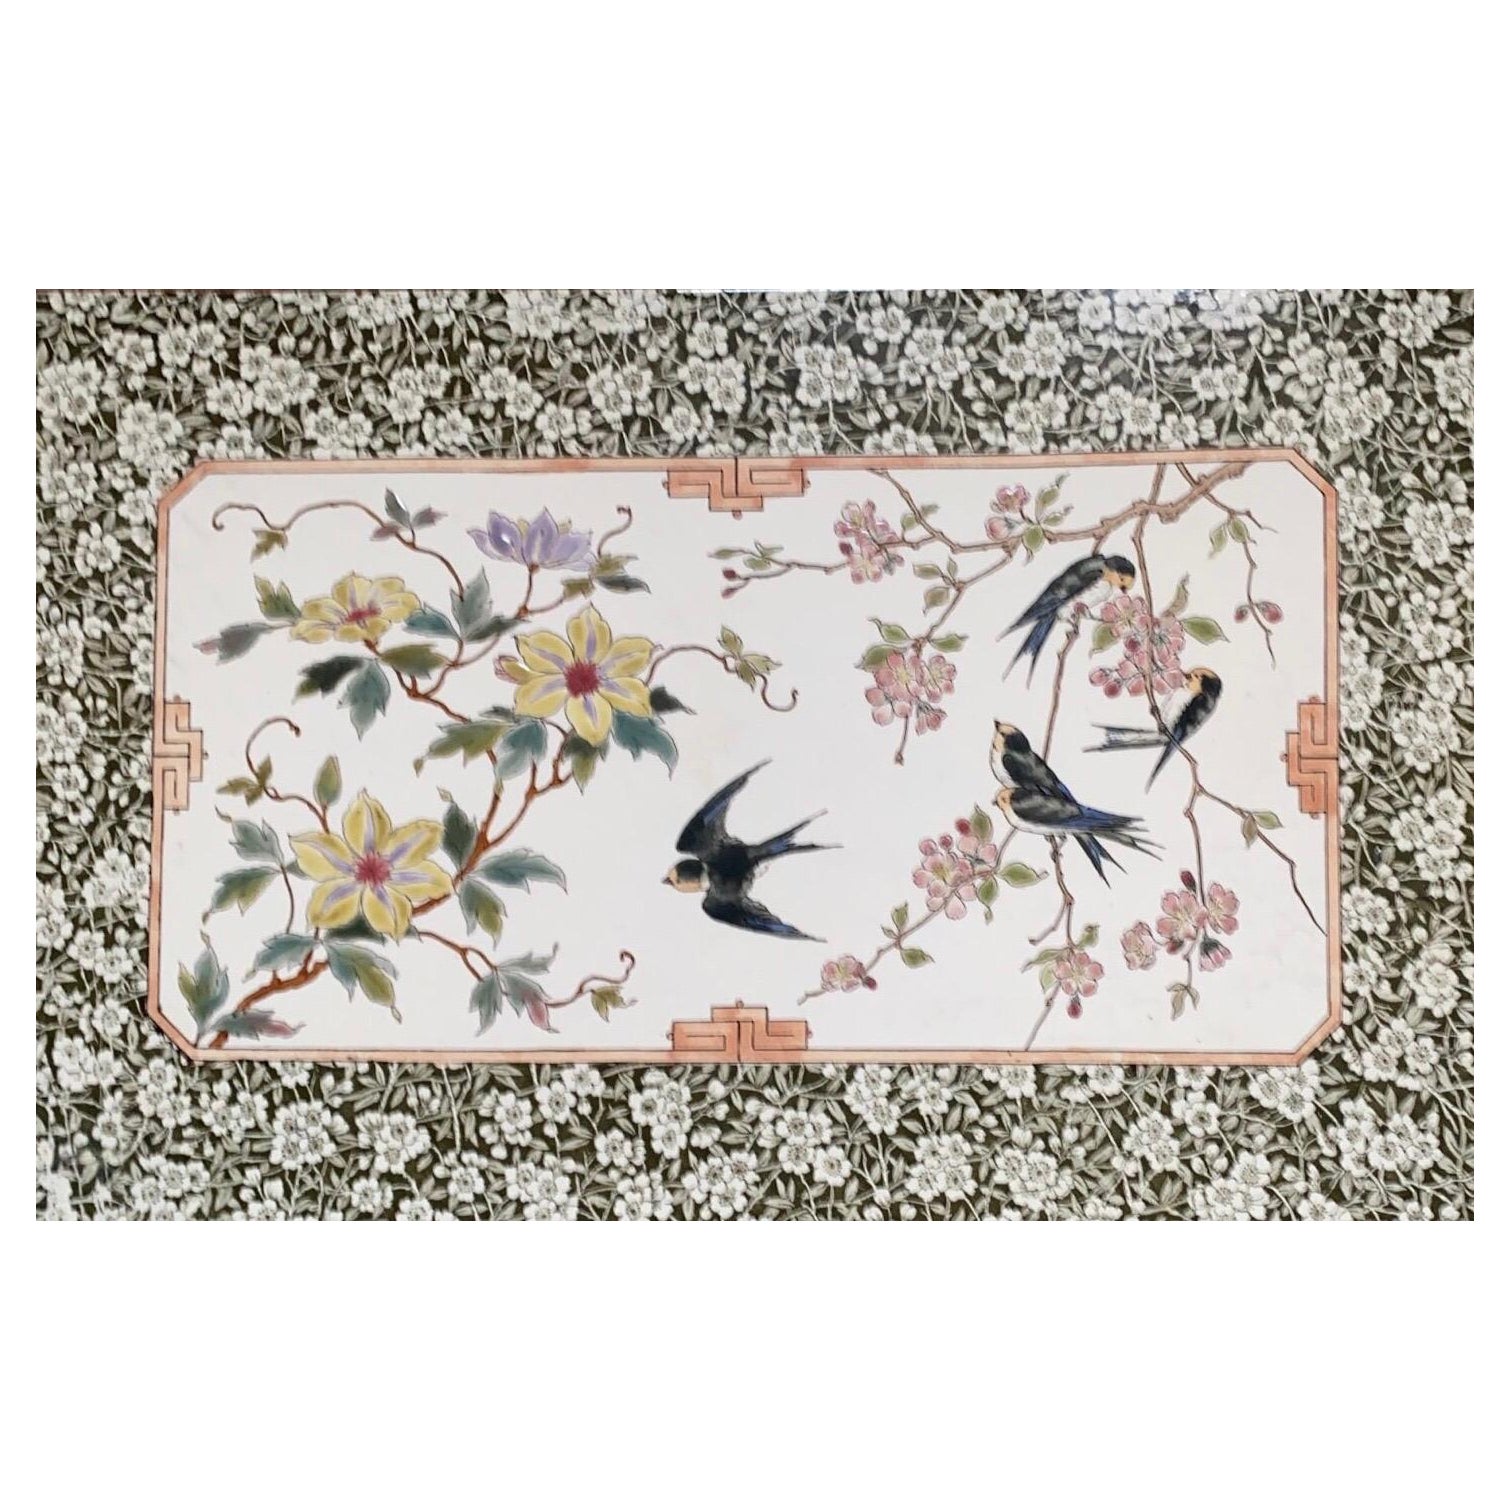 Large 19th Century Ceramic Plaque with Swallows & Flowers For Sale